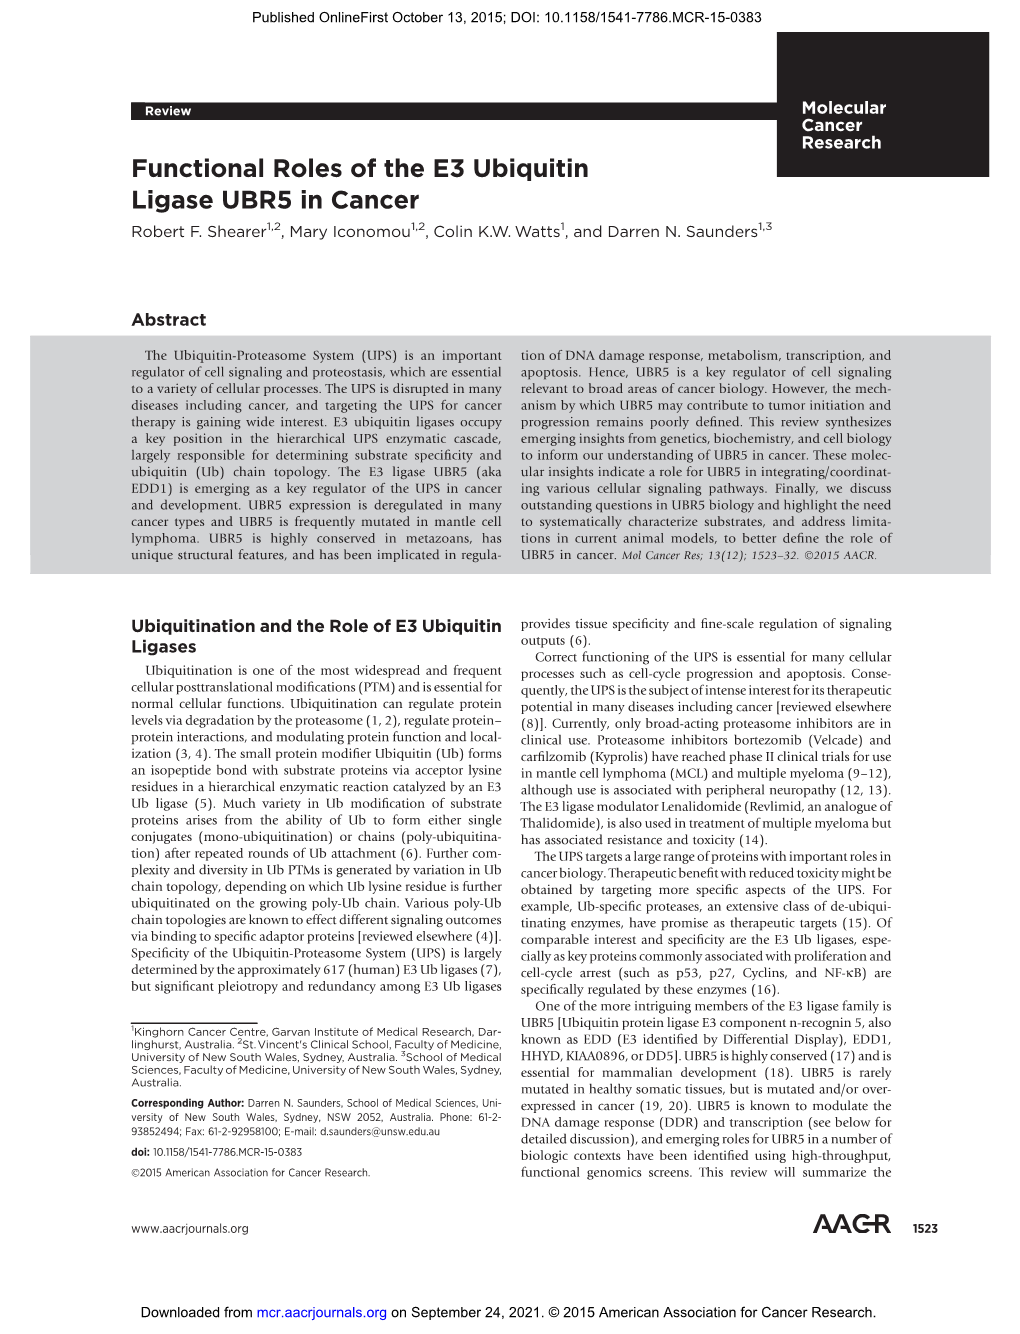 Functional Roles of the E3 Ubiquitin Ligase UBR5 in Cancer Robert F